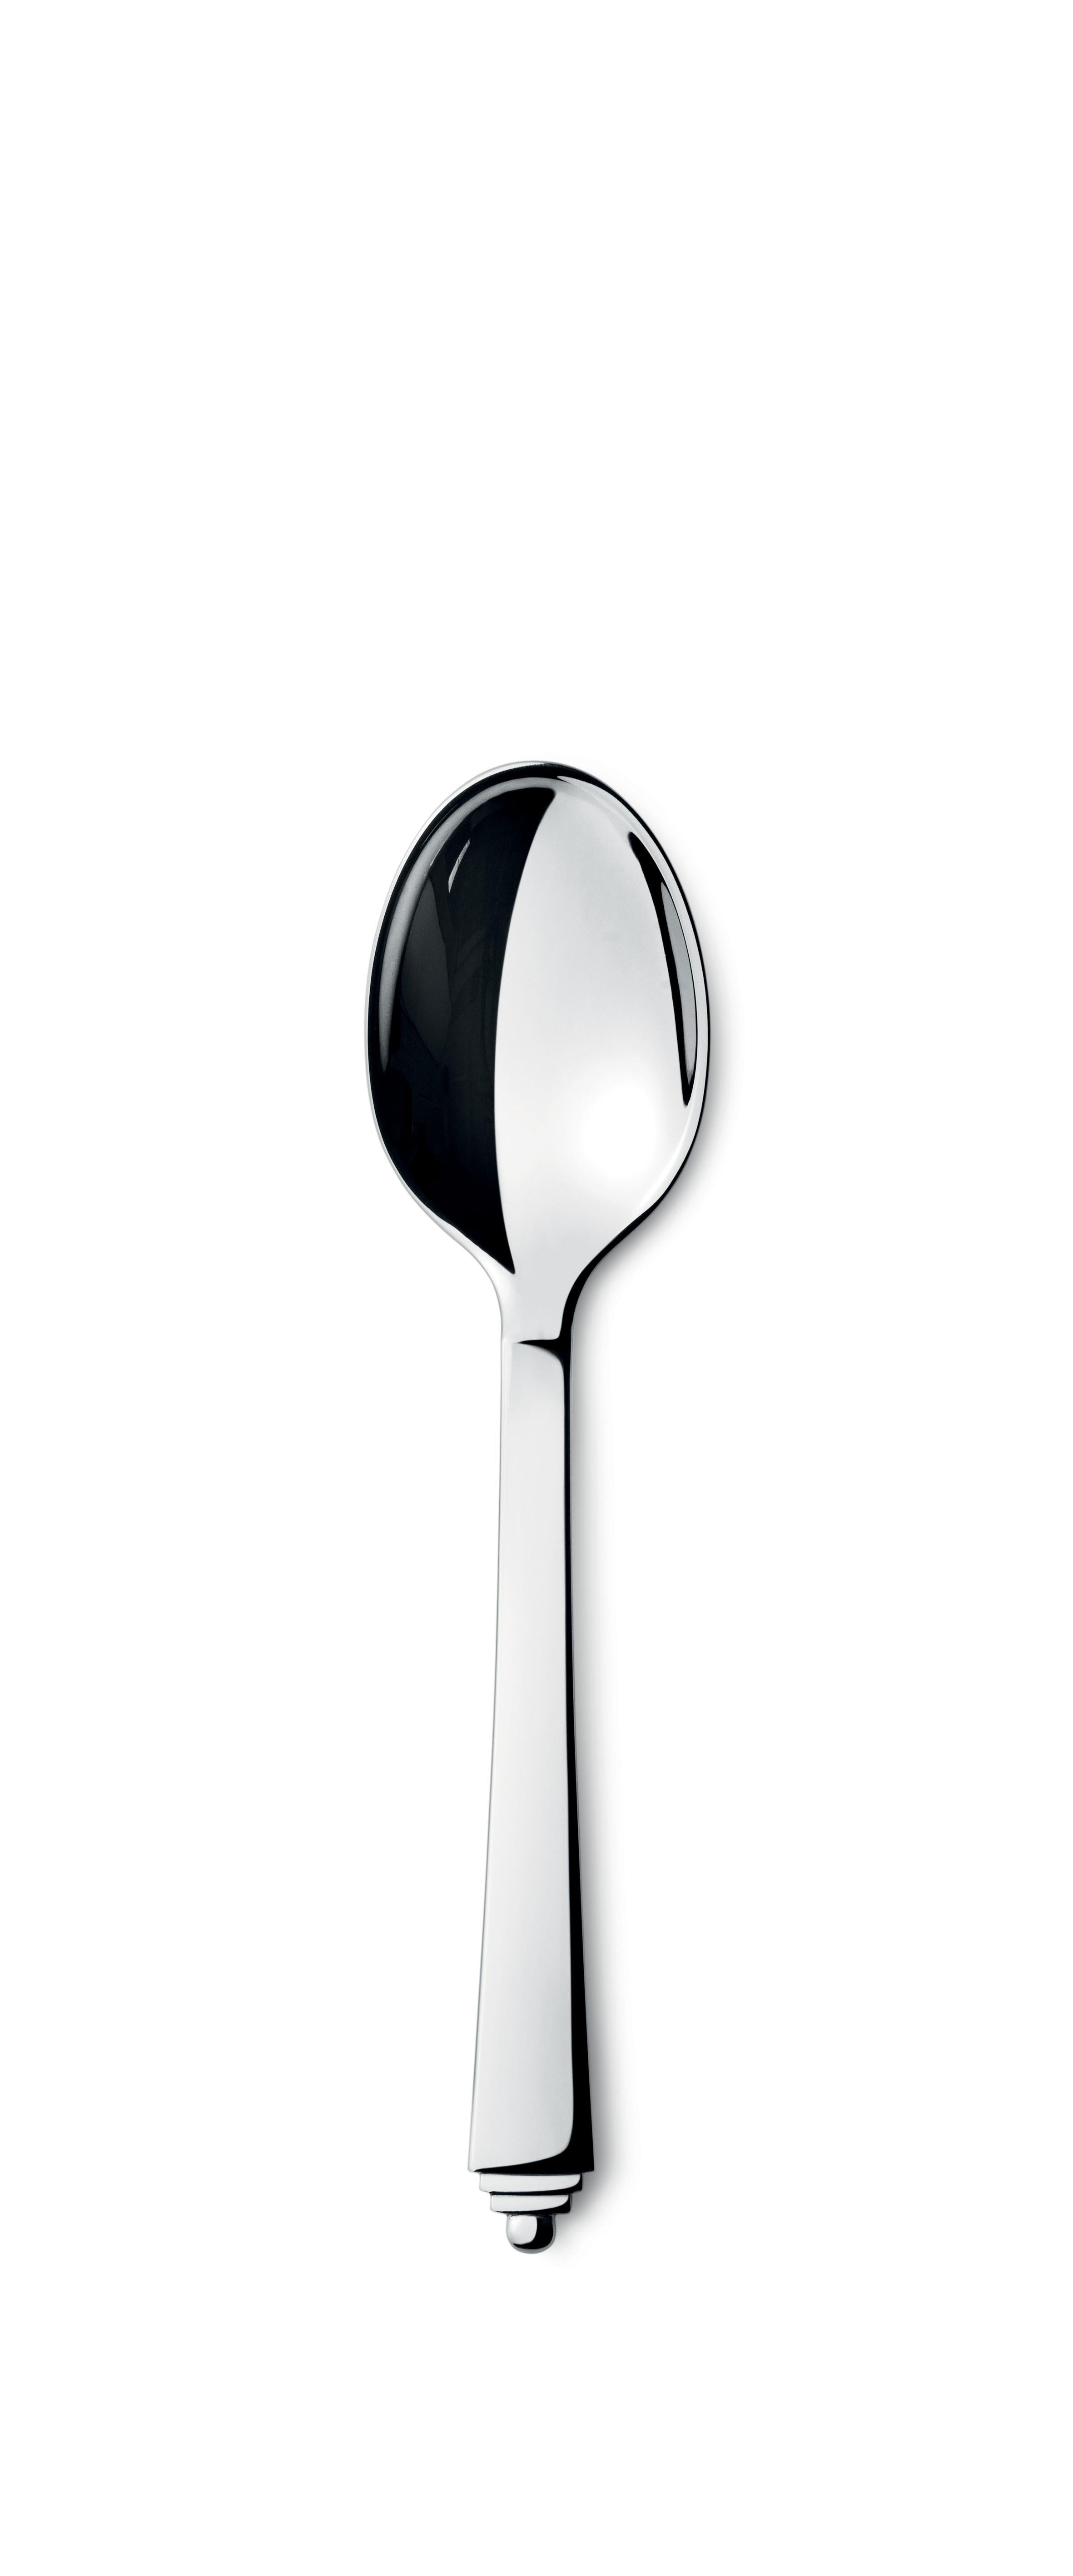 Stainless steel dessert spoon with mirror finish.